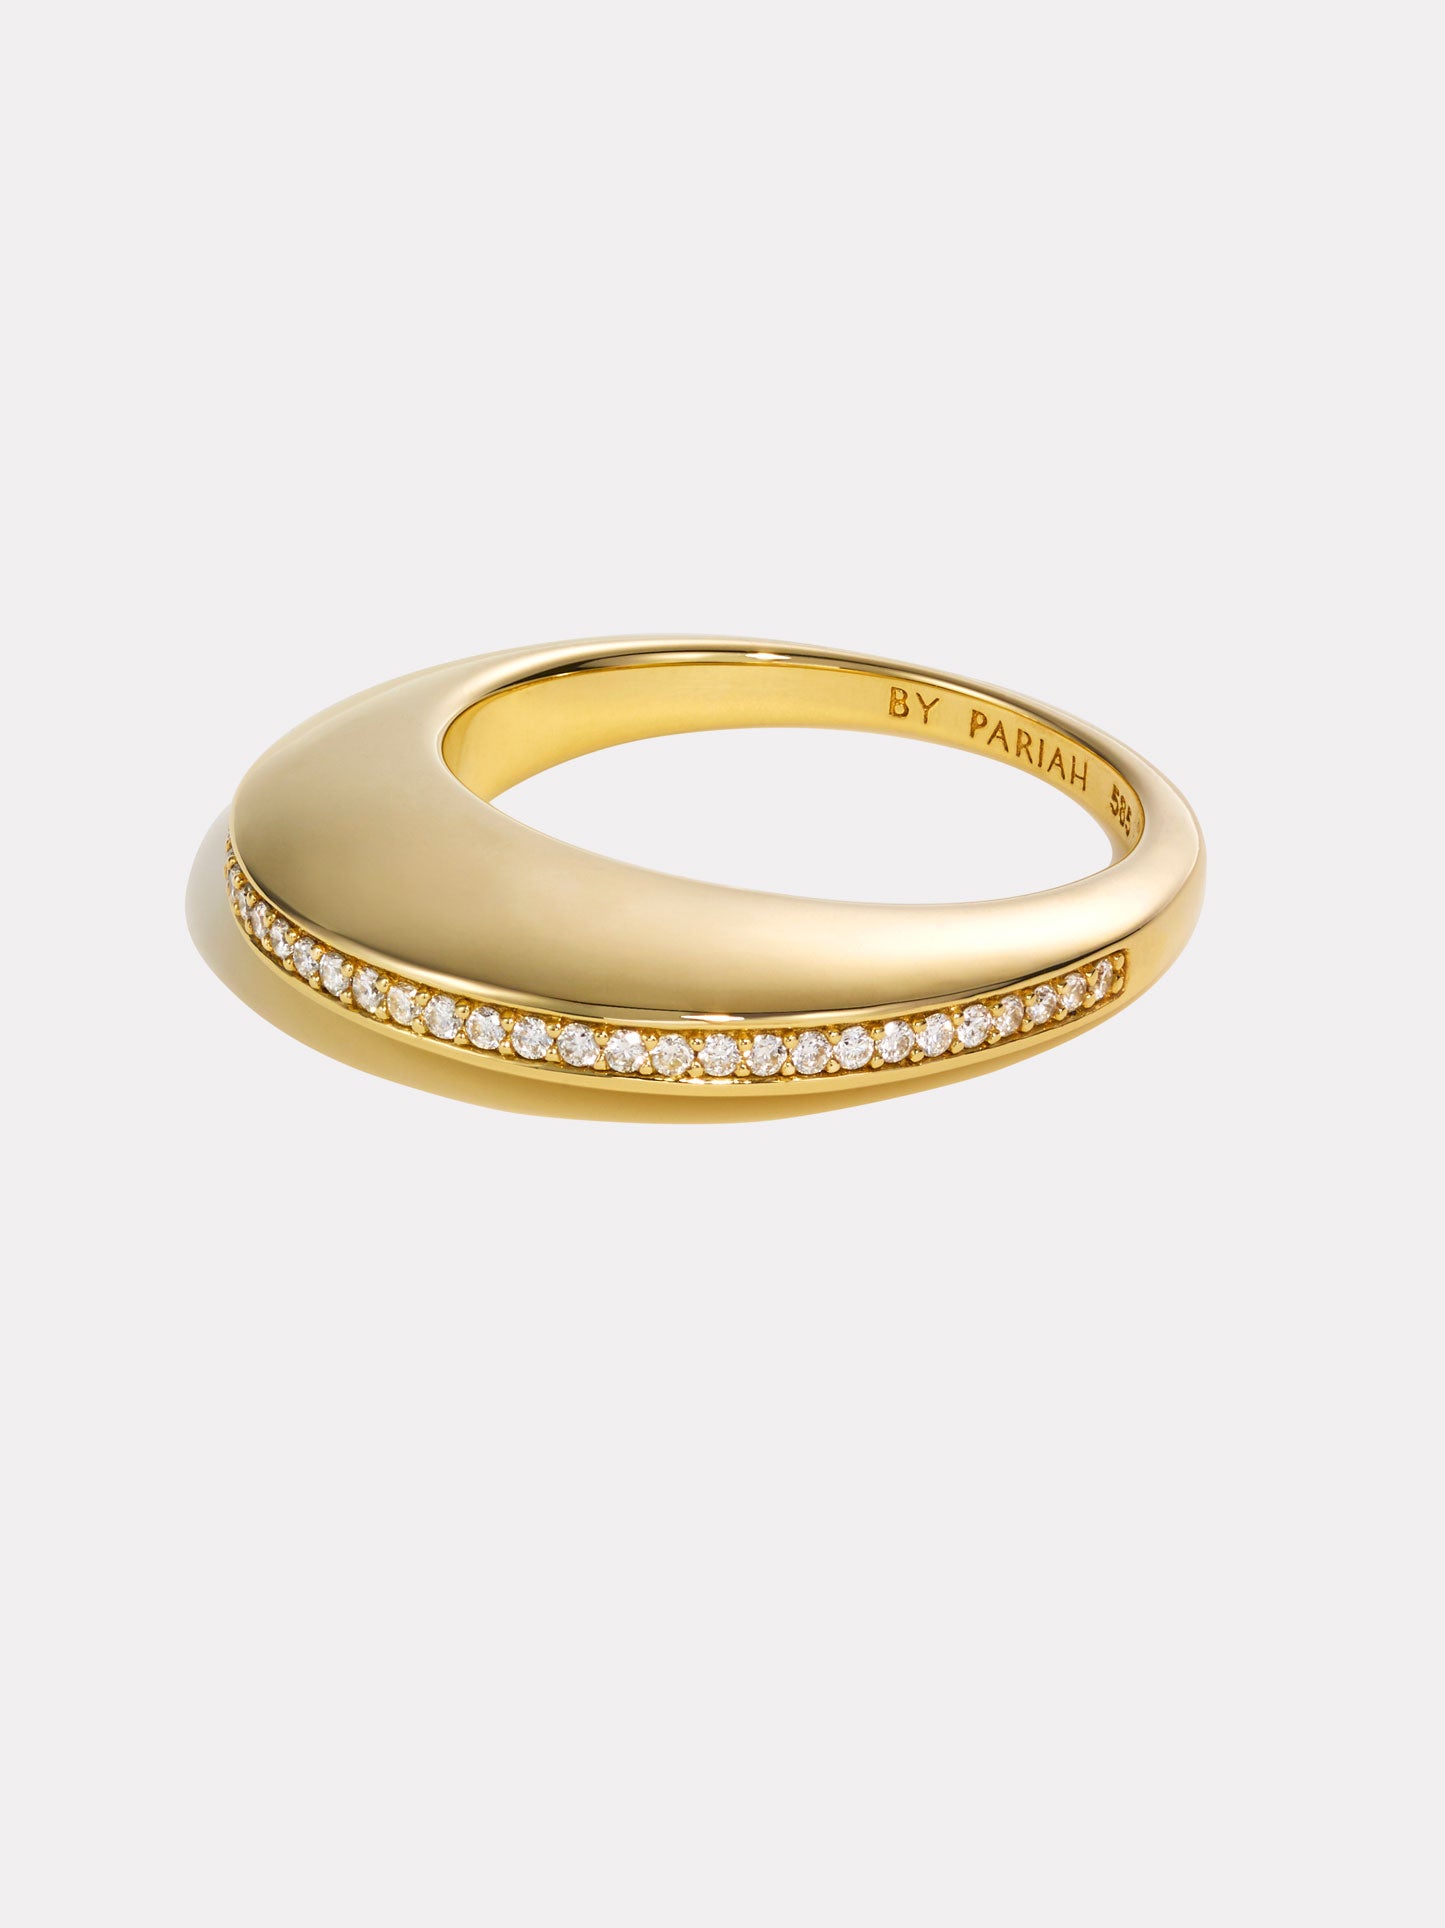 Dimond Gold Linings Ring